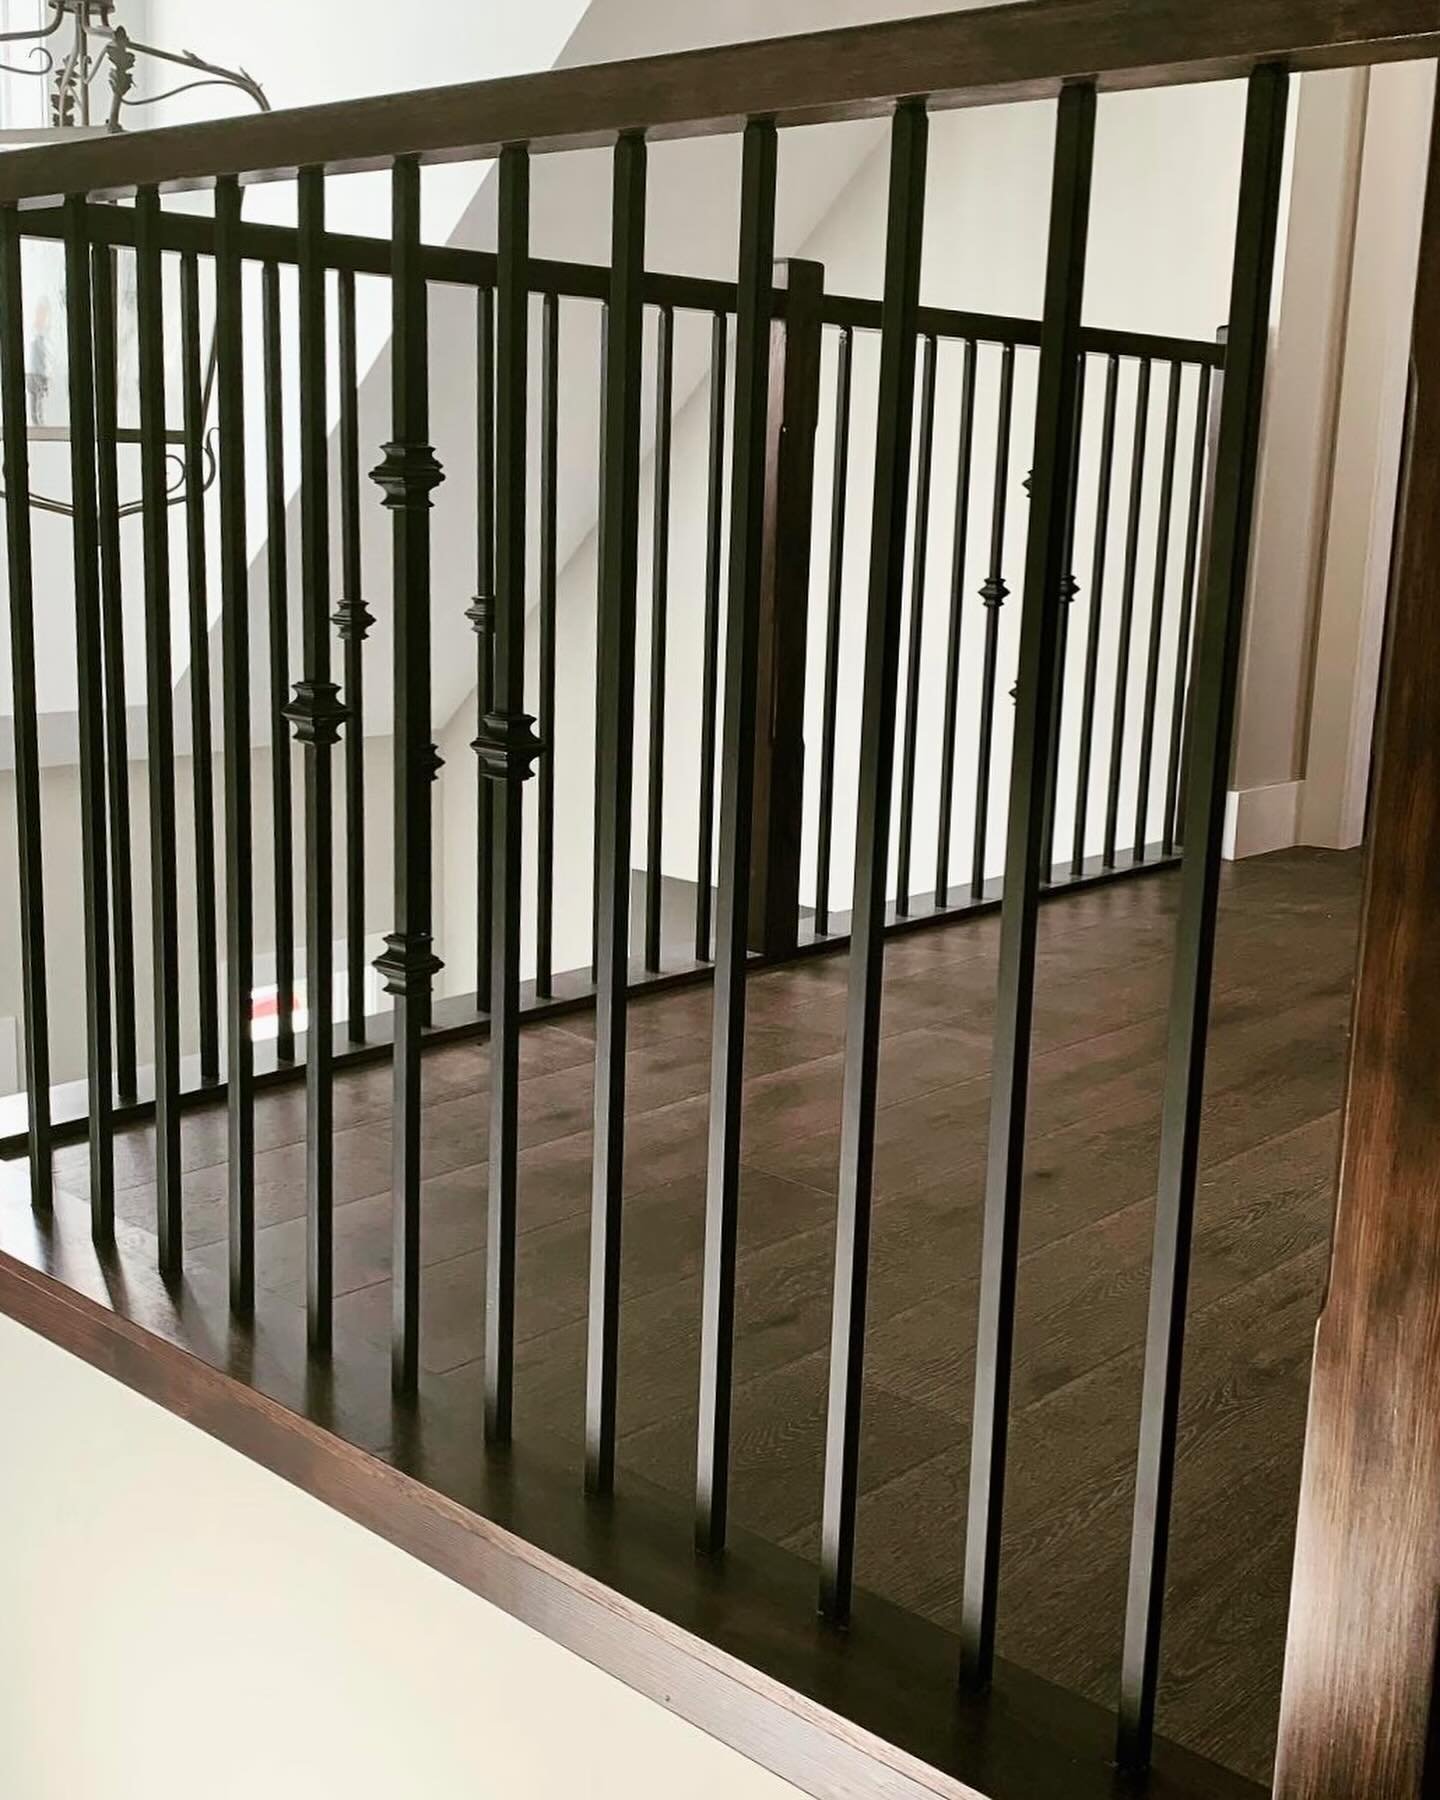 Simplicity and sophistication in this handrail. Dark stained oak and black iron spindles come together for a timeless touch. #yyj #victoriabccanada #victoriarealestate #yyjbusiness #kitchendesign #bathroomdesign #interiordesign #hightideinteriors #yy